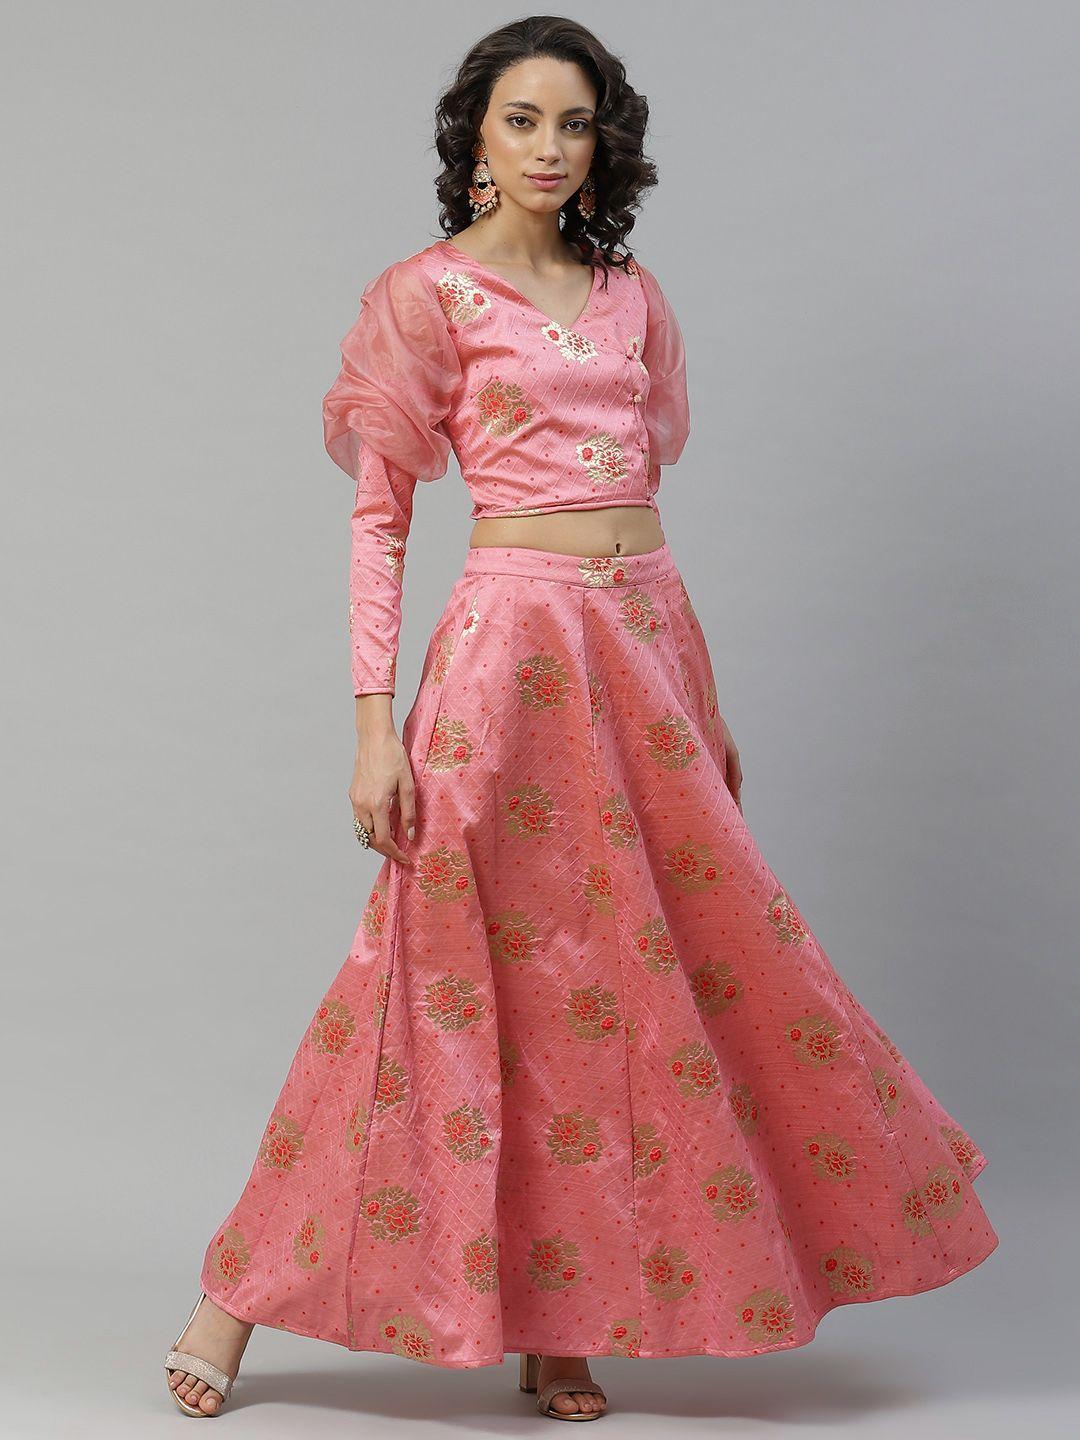 flaher-pink-&-golden-floral-woven-design-ready-to-wear-lehenga-with-blouse